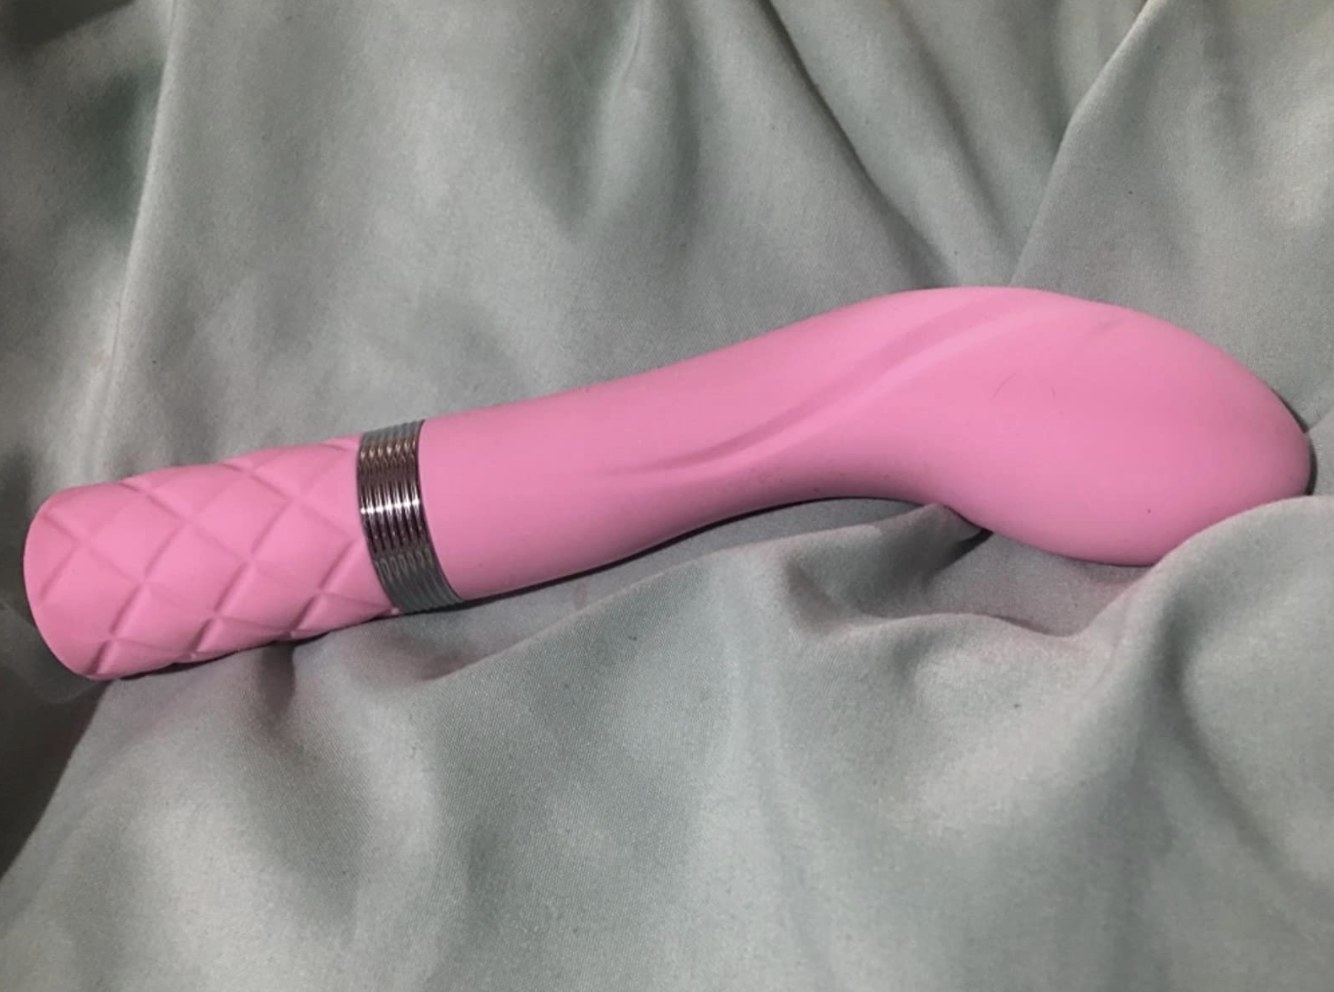 The quilted vibrator